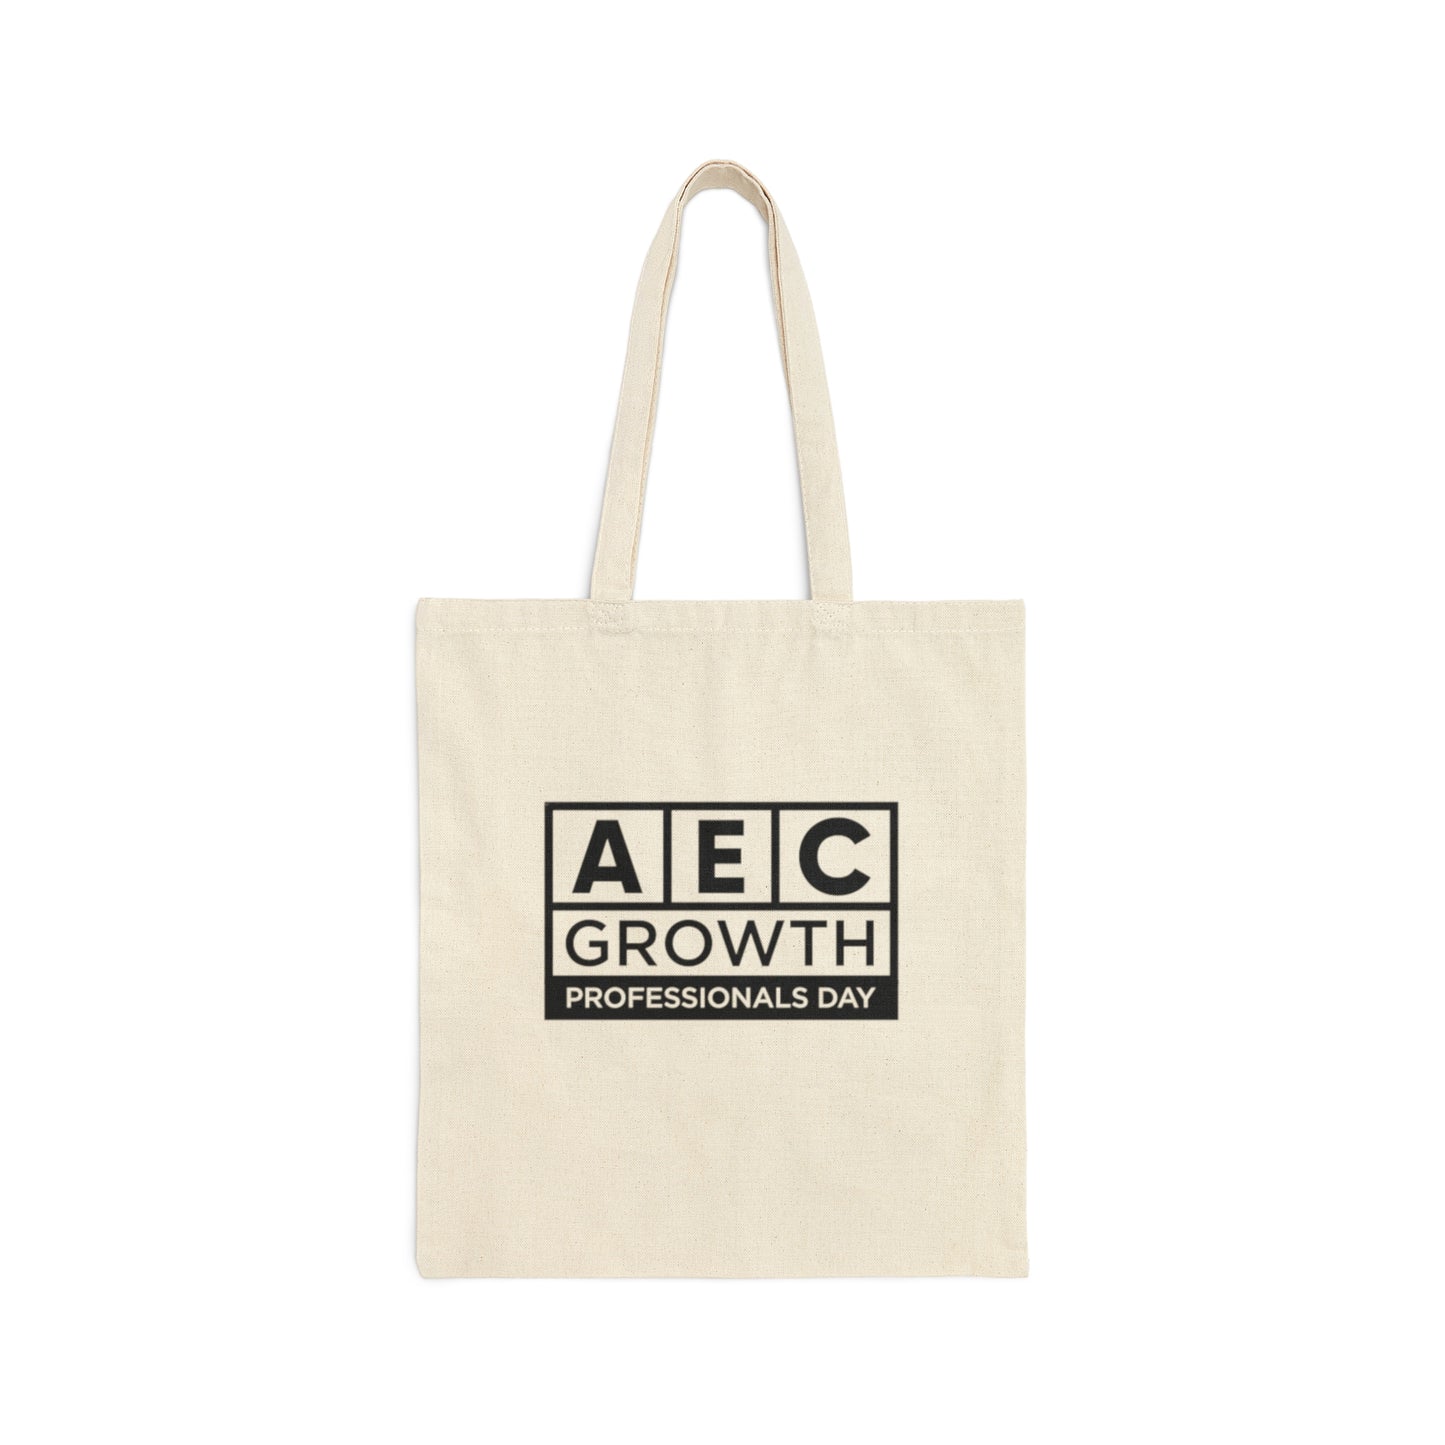 AEC Growth Professionals Day Cotton Tote Bag - Black